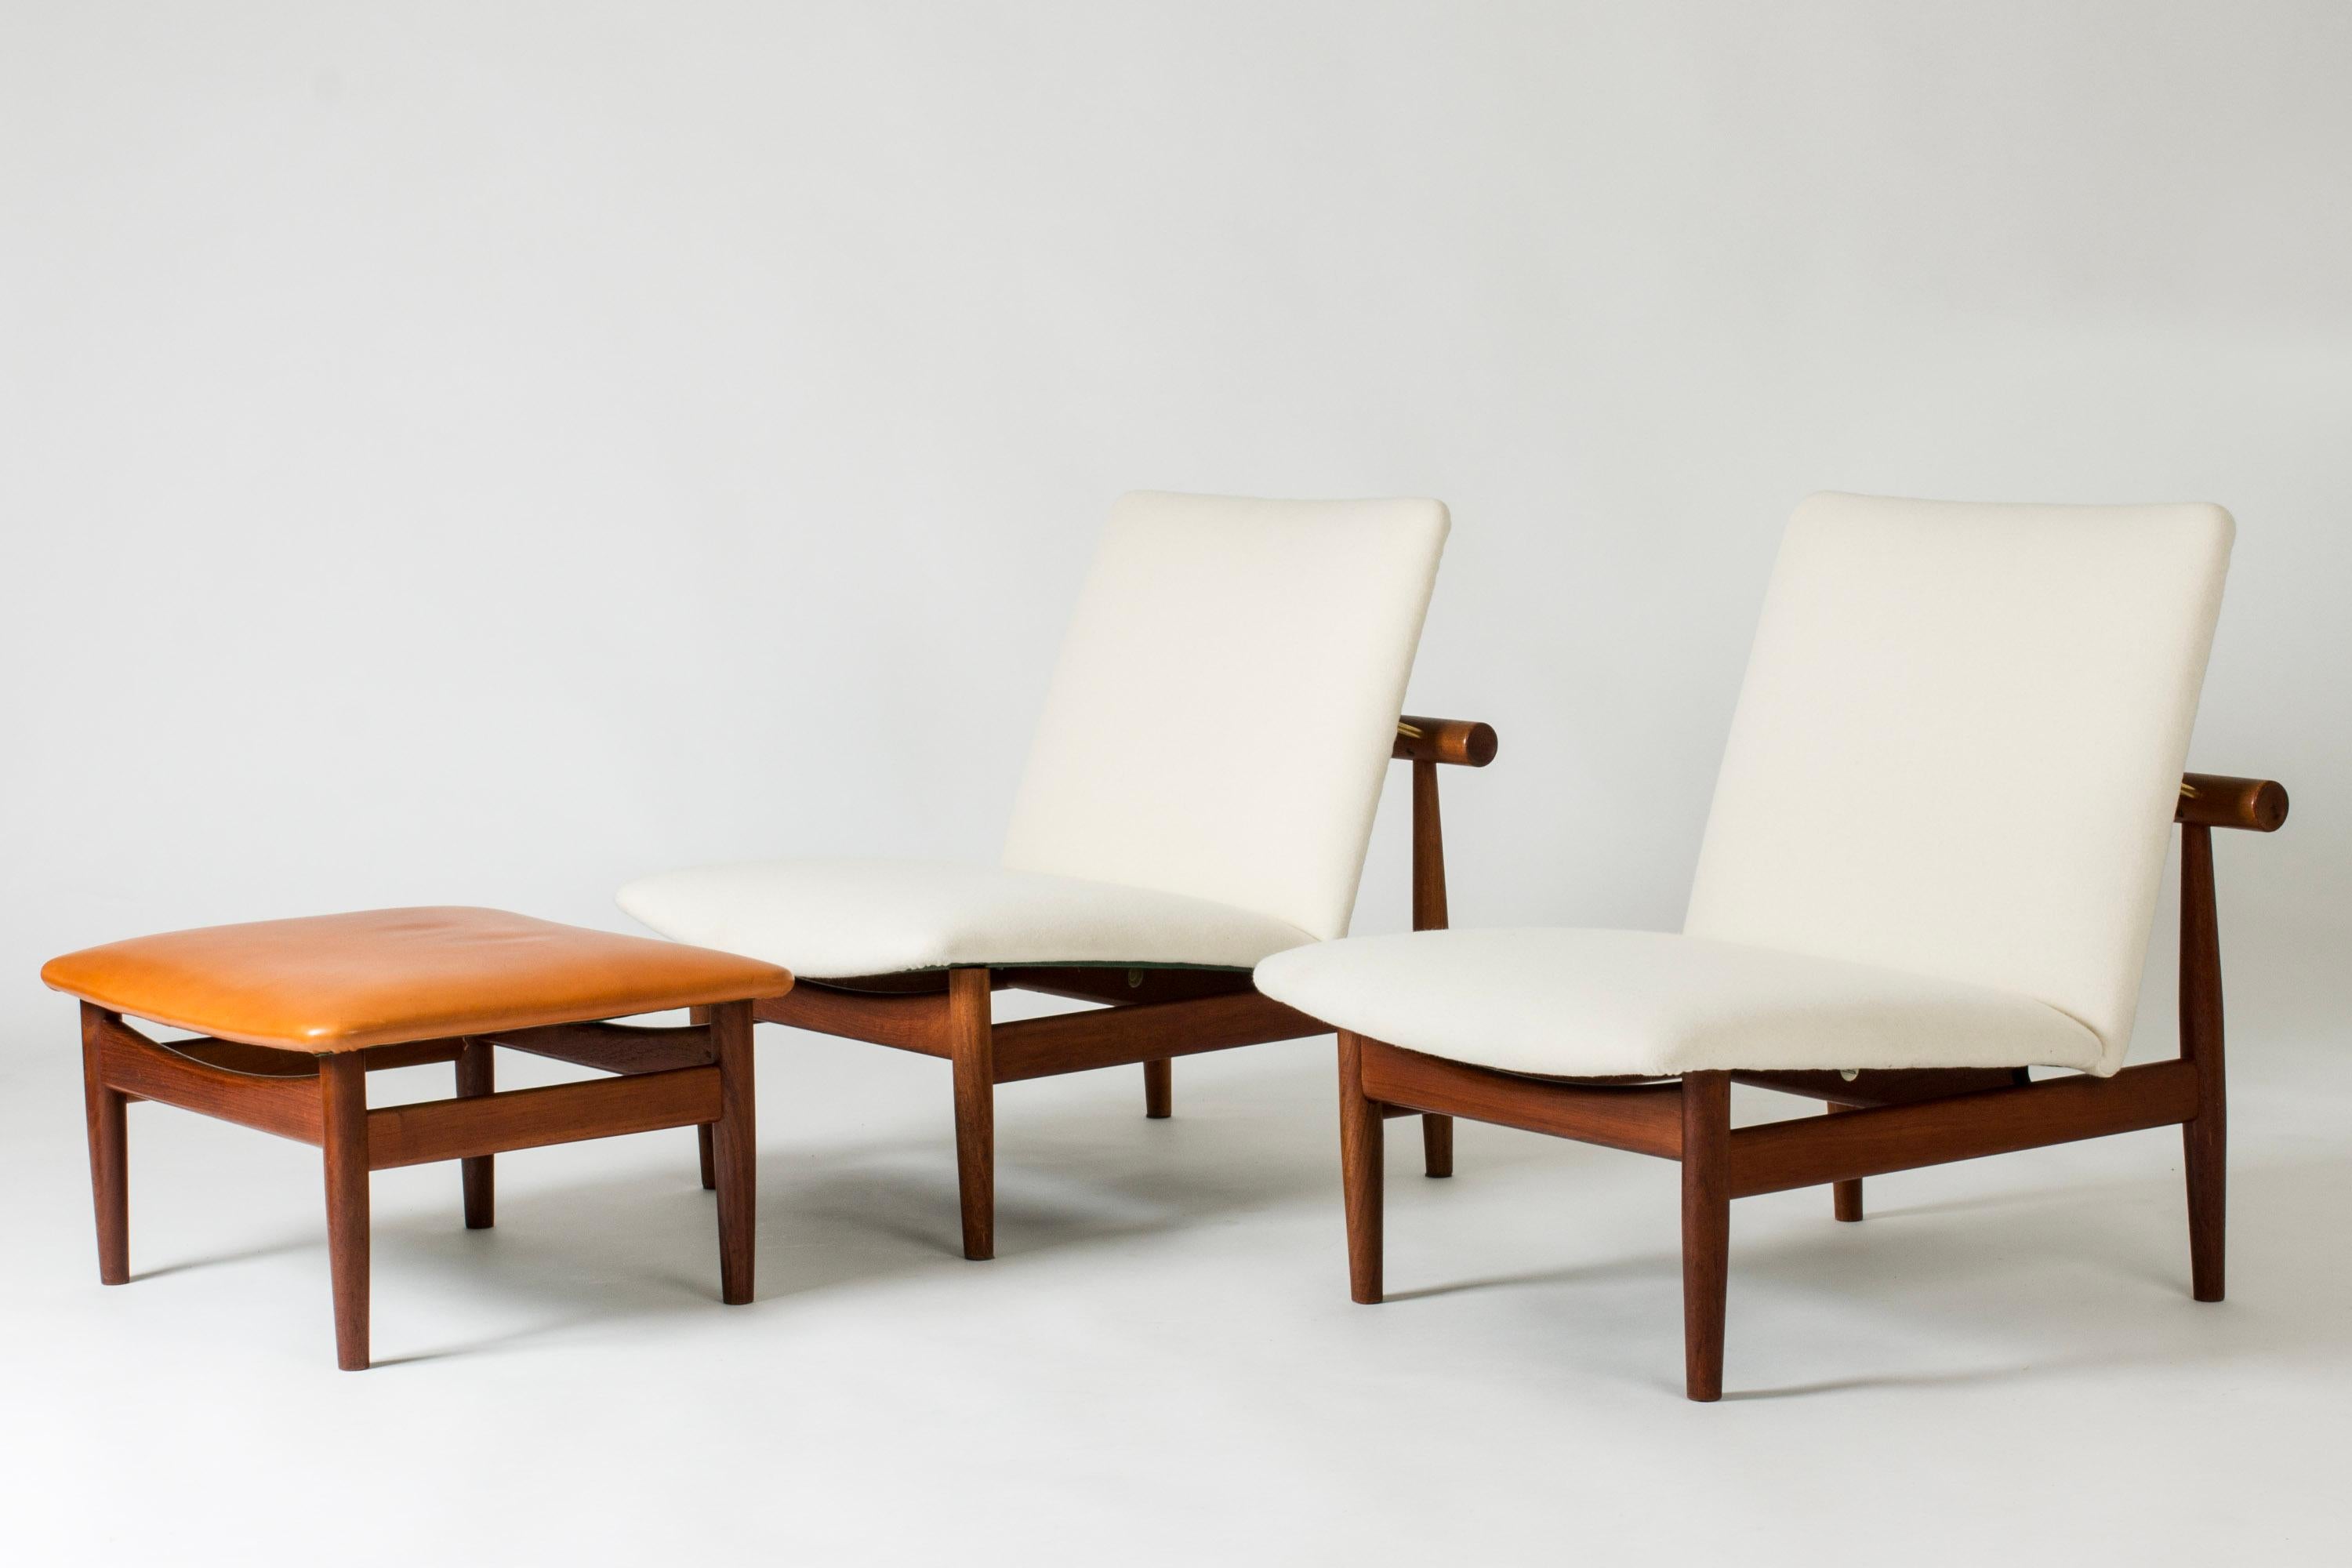 Pair of elegant “Japan” lounge chairs, made from teak with clean lines. White wool upholstery. Shared ottoman with cognac colored leather.